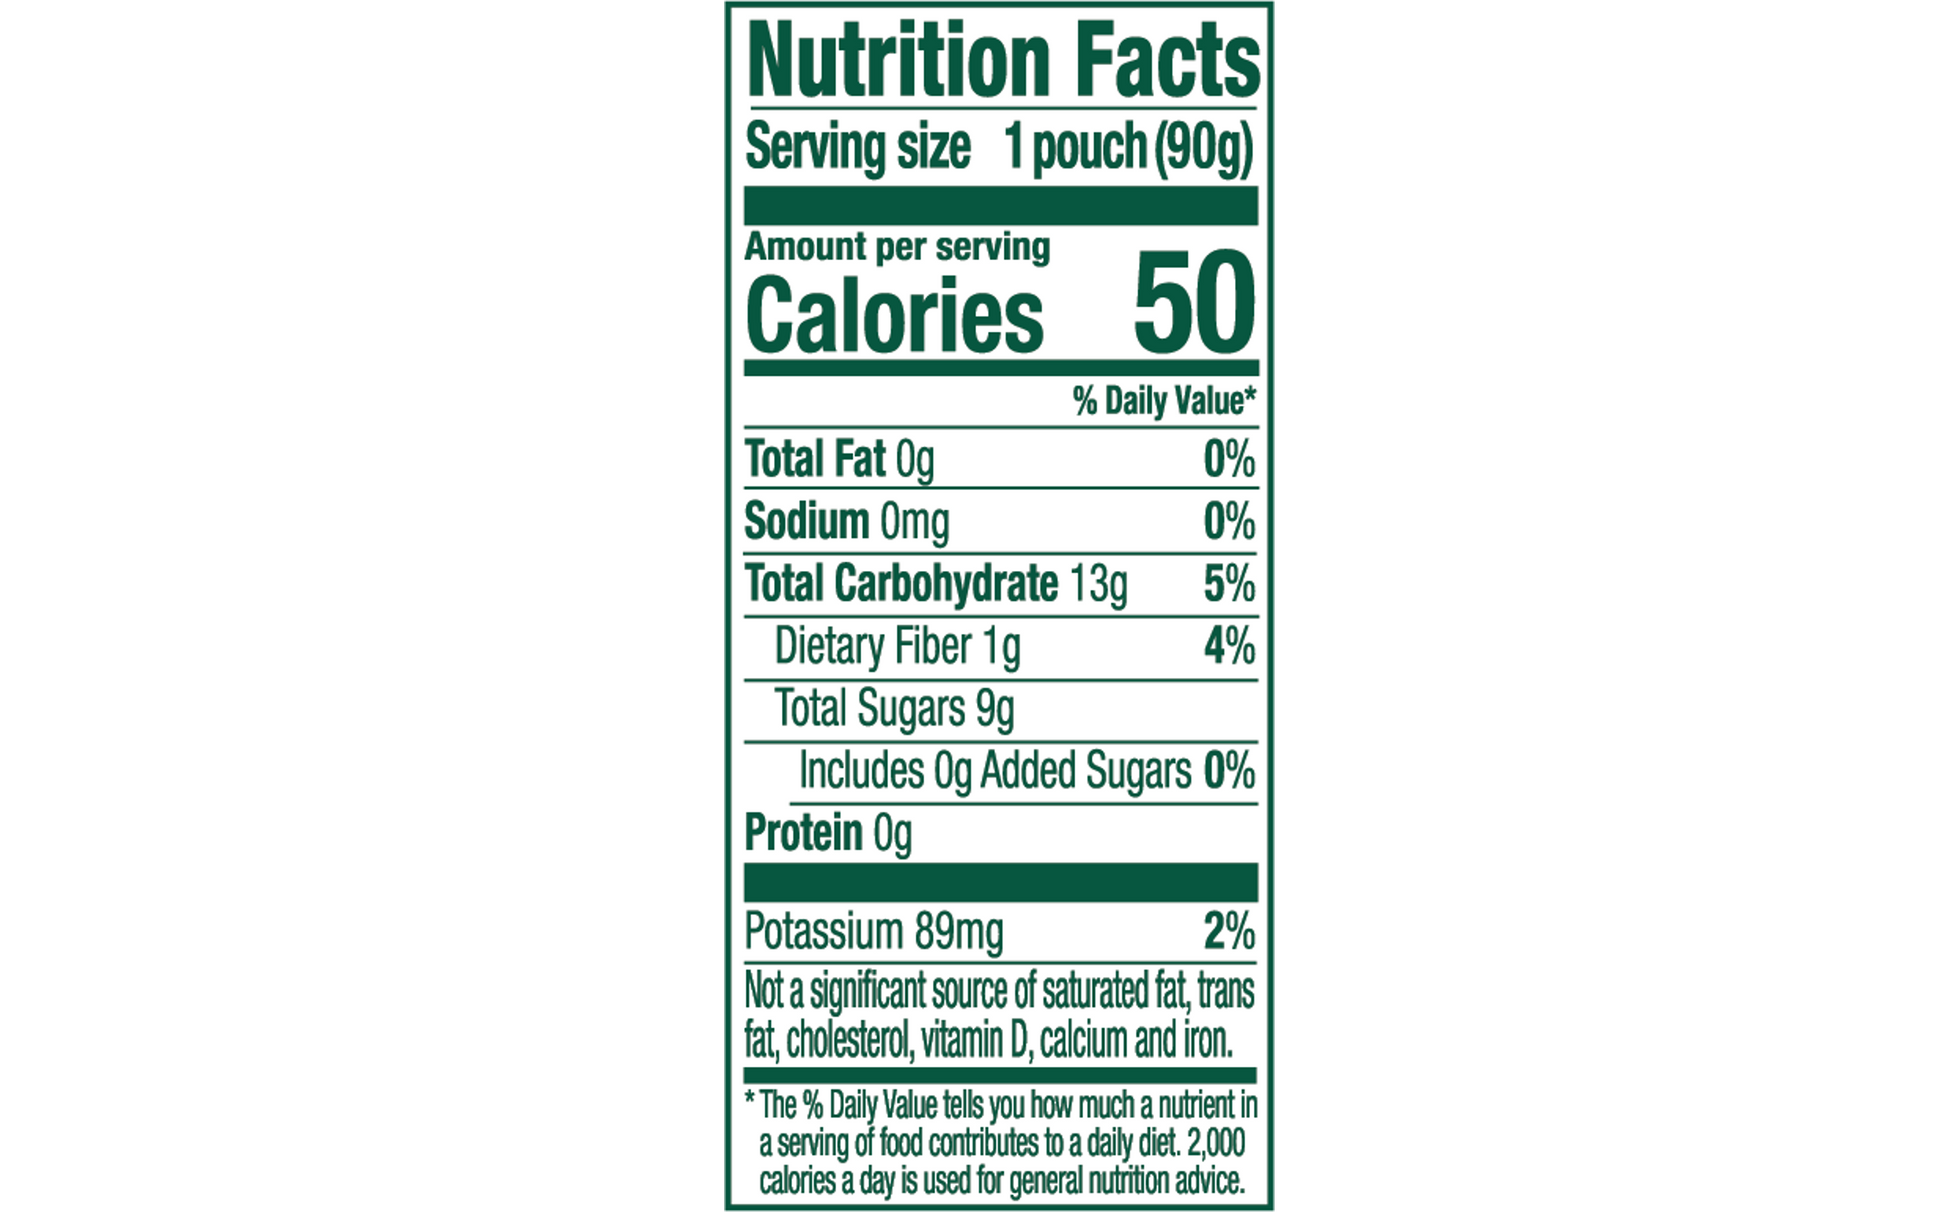 Nutrition facts for Buddy Fruits Multifruit & Apple fruit pouch.